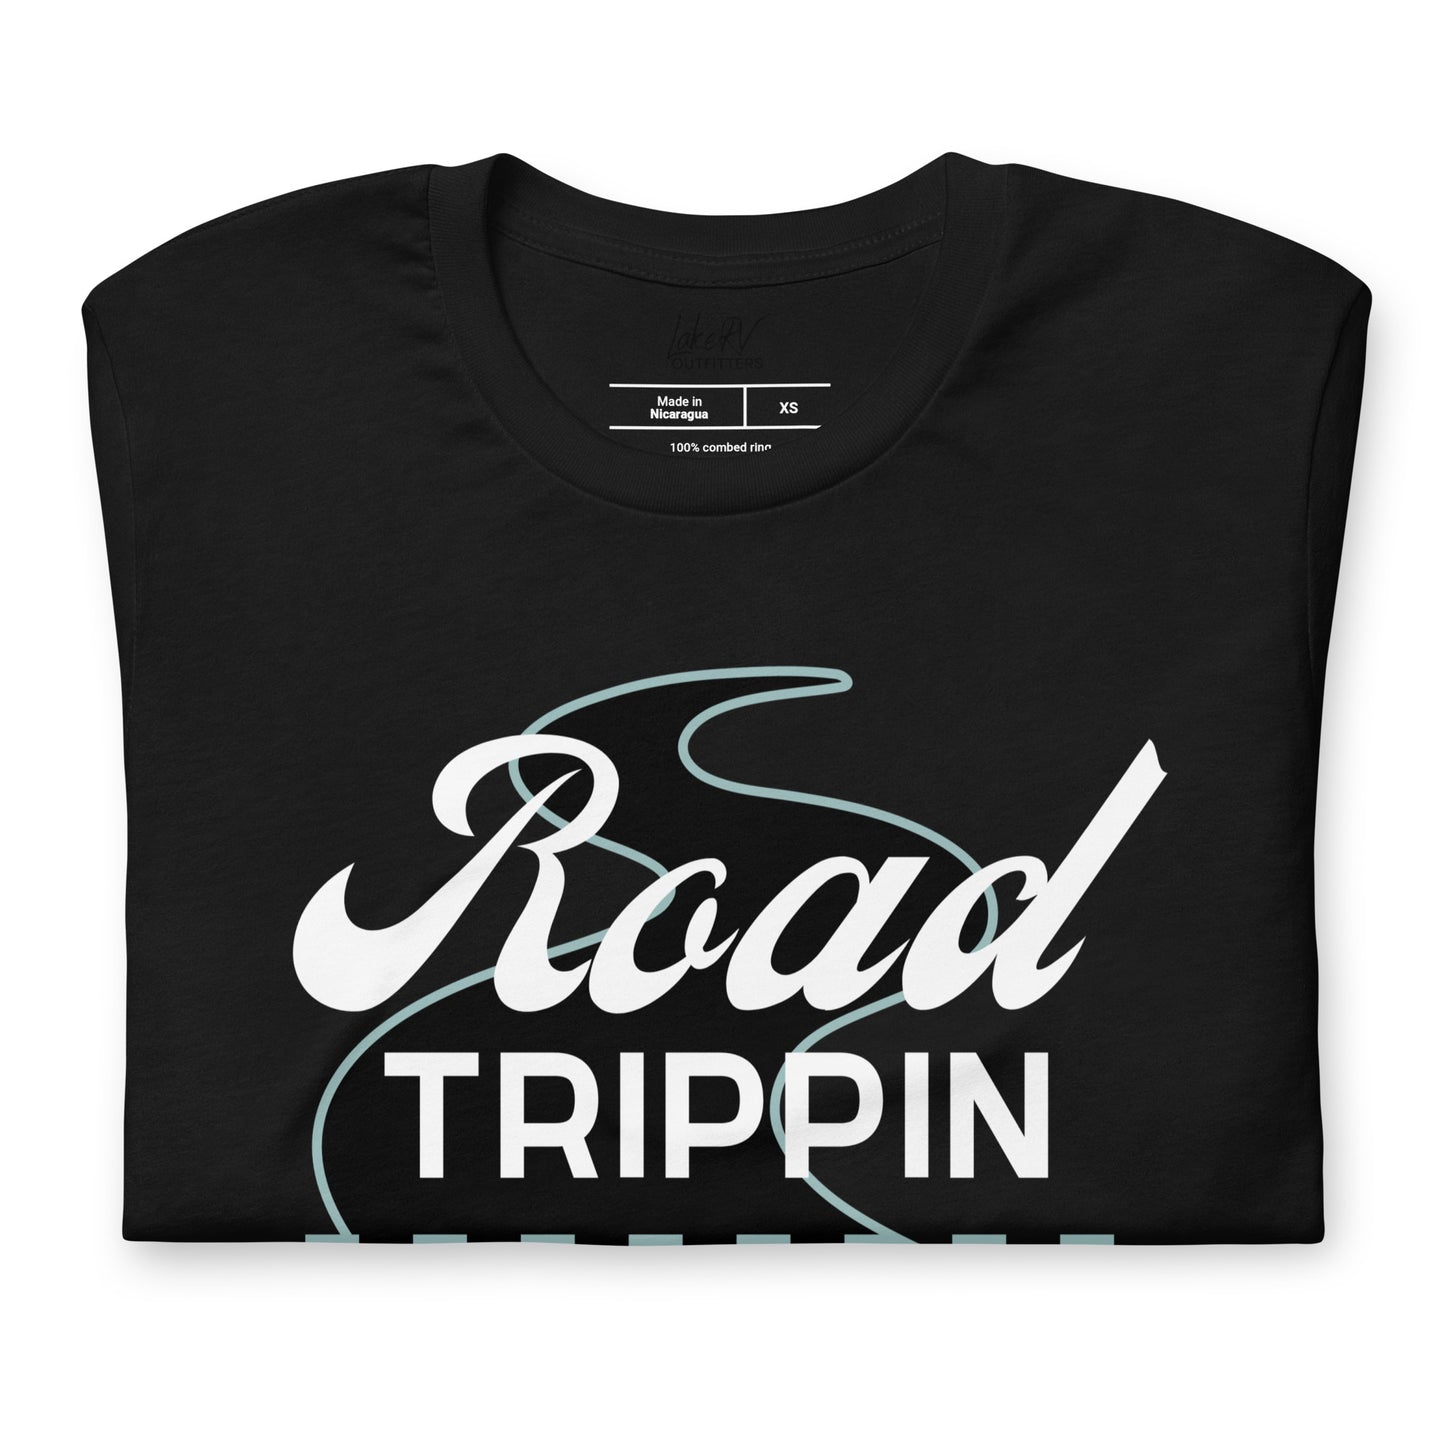 ROAD TRIPPIN mens s/s tee